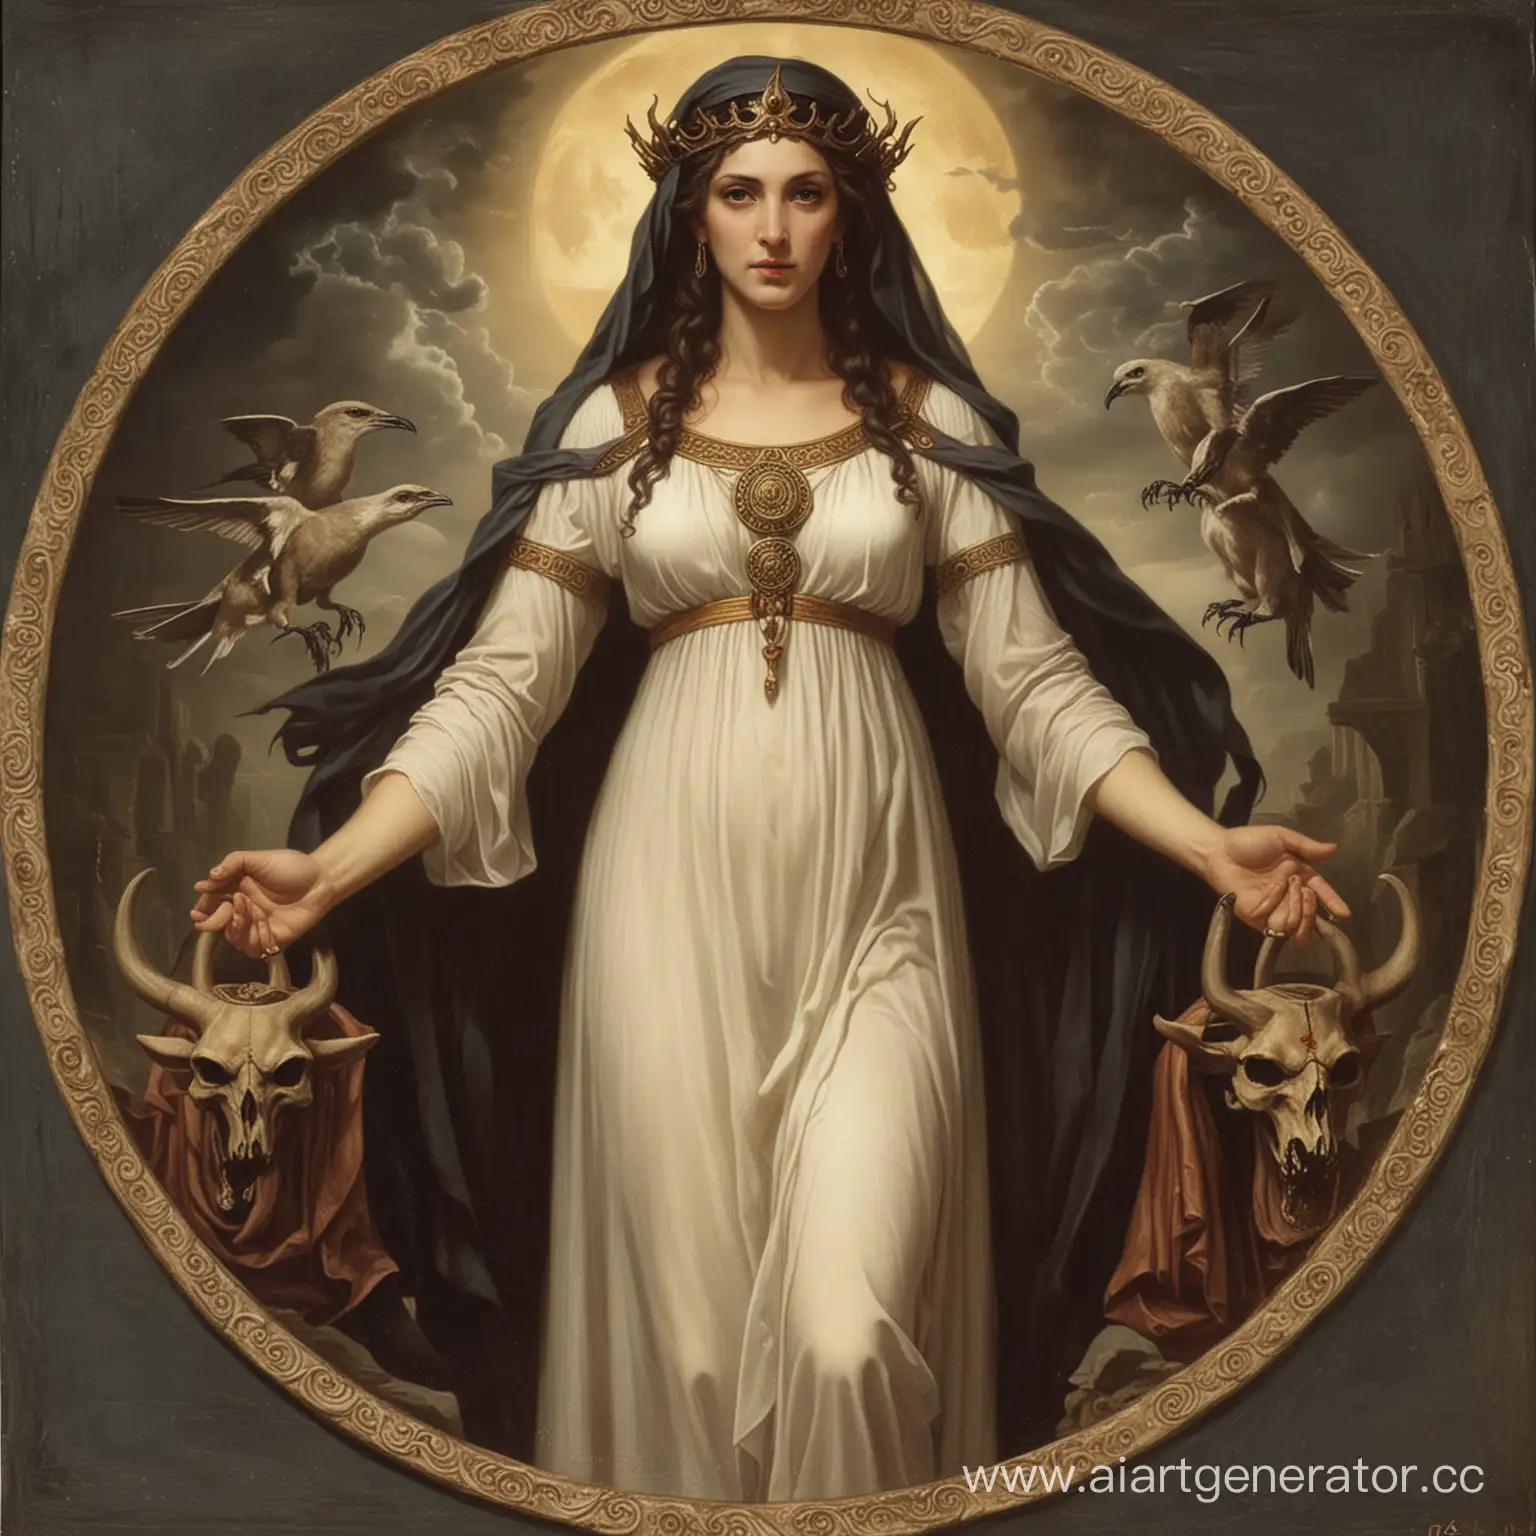 Sacred-Marriage-of-Hecate-Ritual-with-Iphigenia-and-the-Merchant